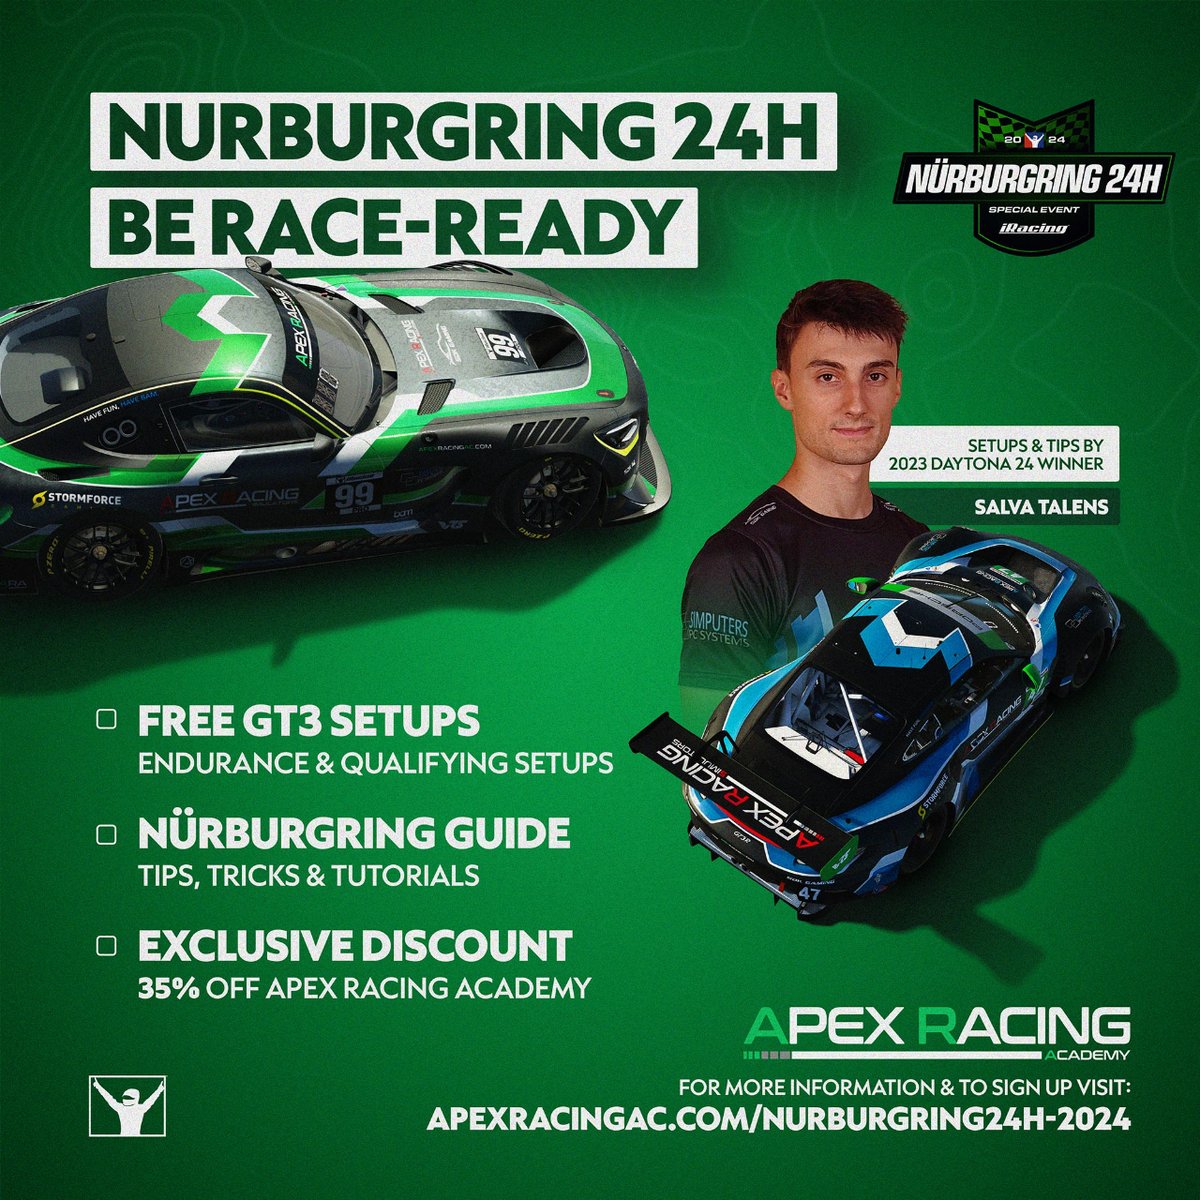 Be race-ready for @iRacing 🇩🇪 Nürburgring 24H! 💸 35% discount code! ✅ Free GT3 setups ✅ Tips, Tricks & Tutorials 🔗 apexracingac.com/nurburgring24h… #apexracingacademy #iracing